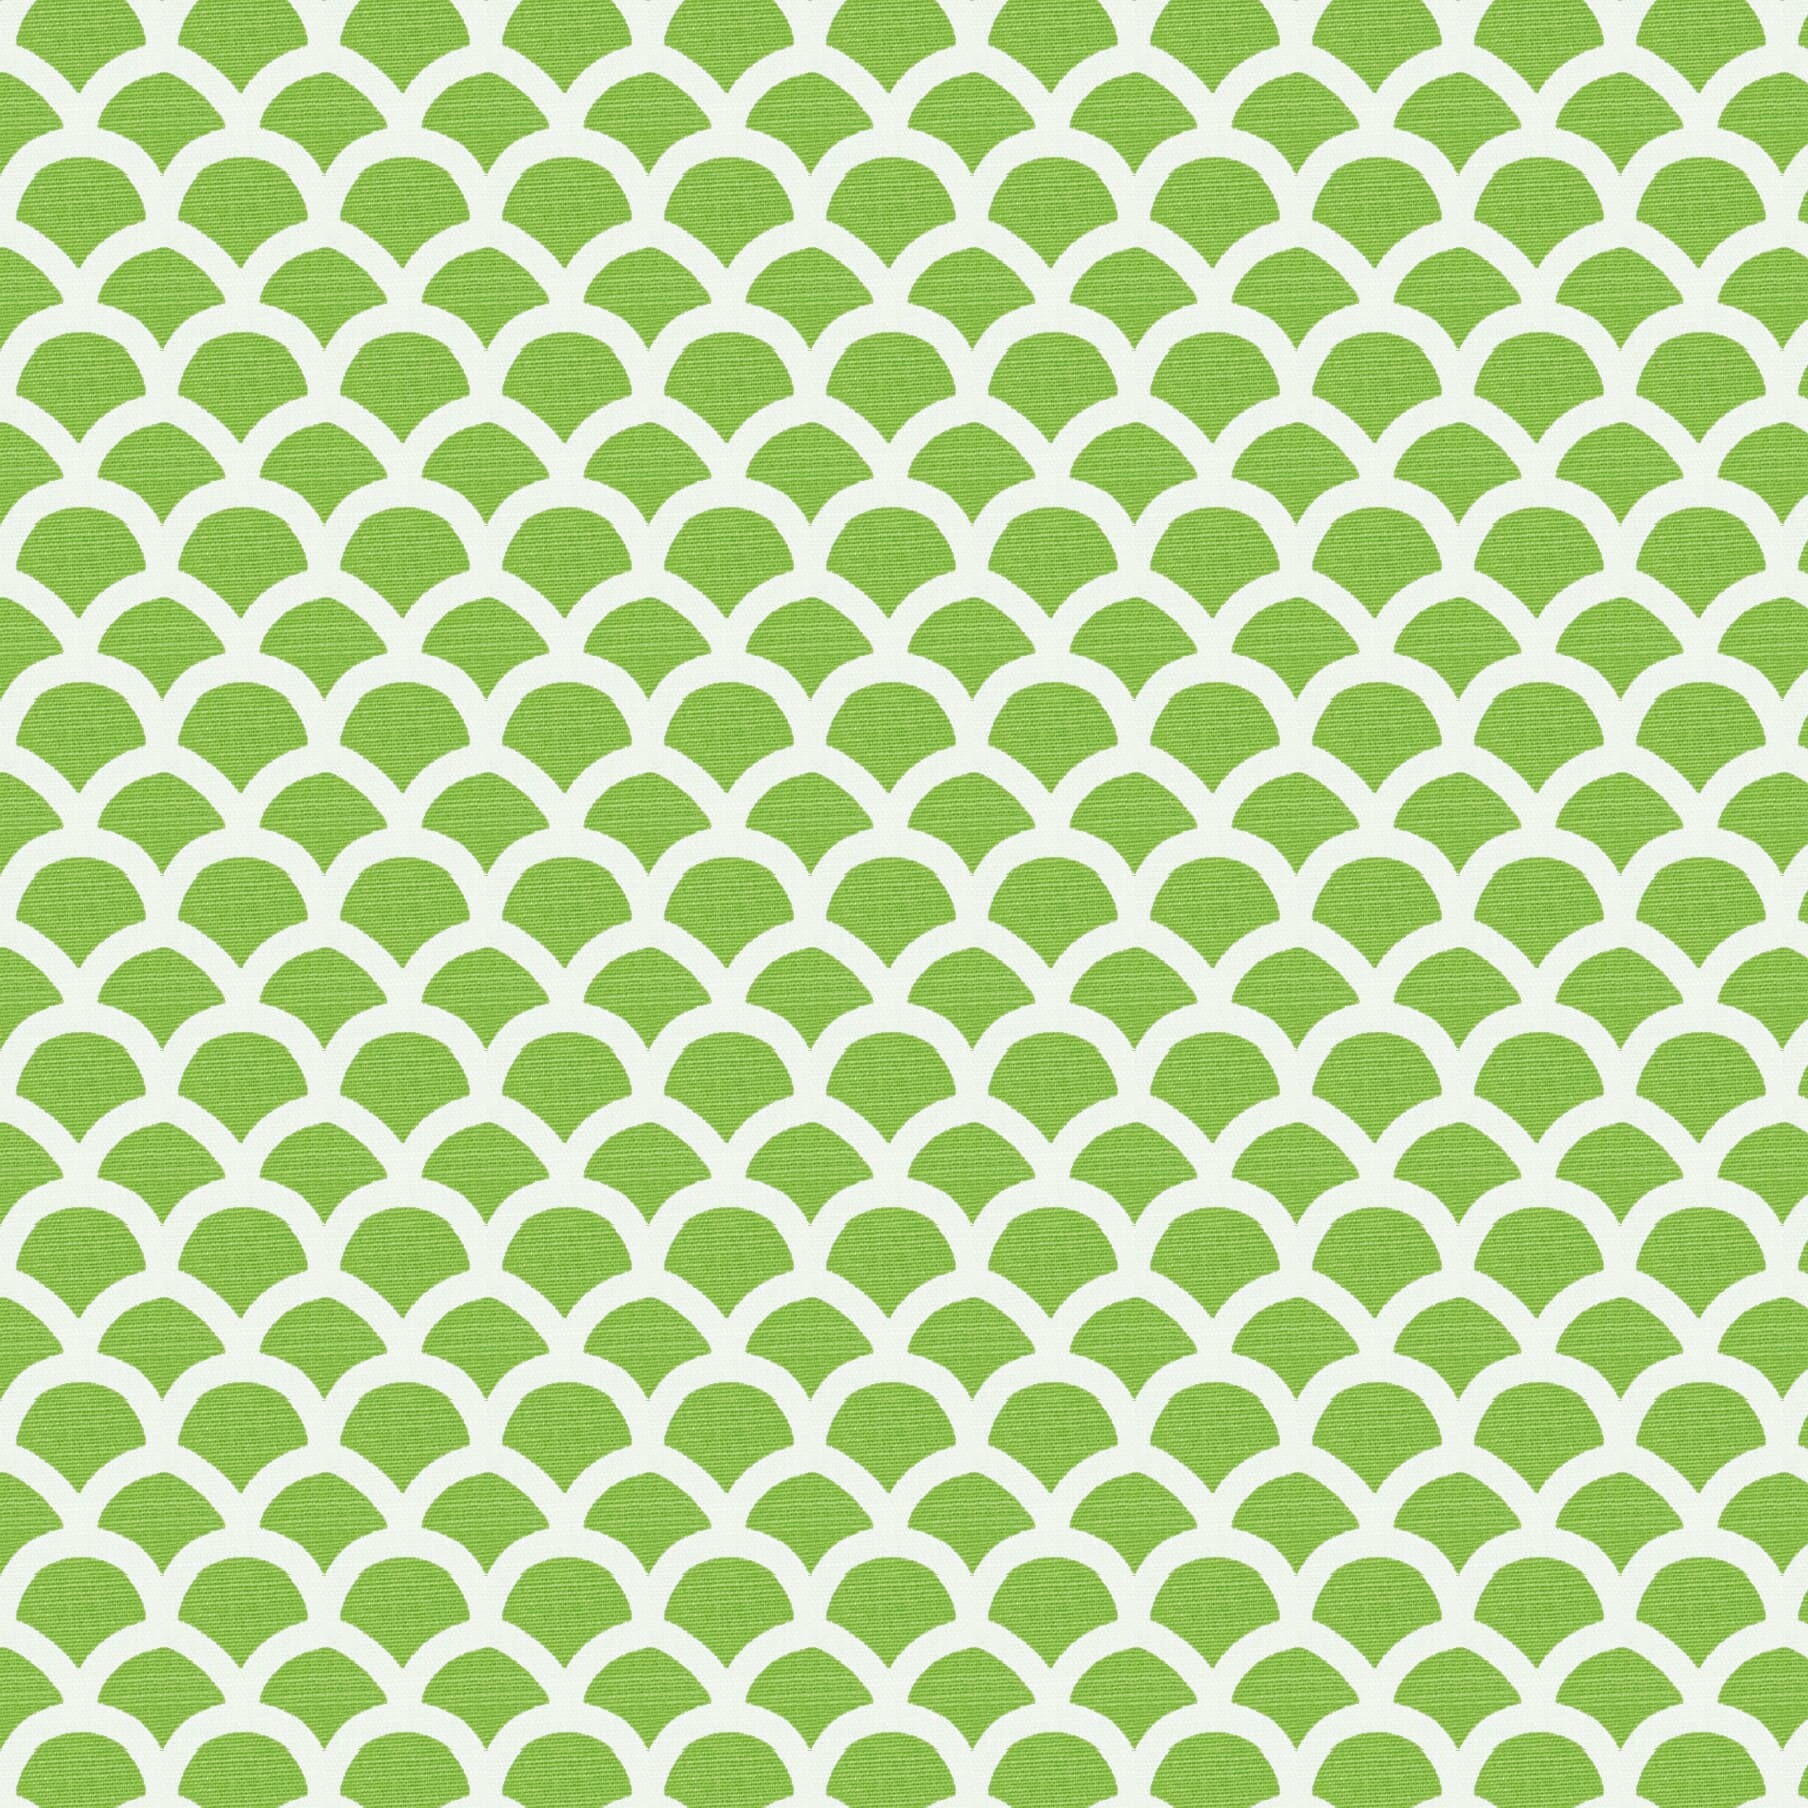 7827-4 St Barth Gate Spring by Stout Fabric